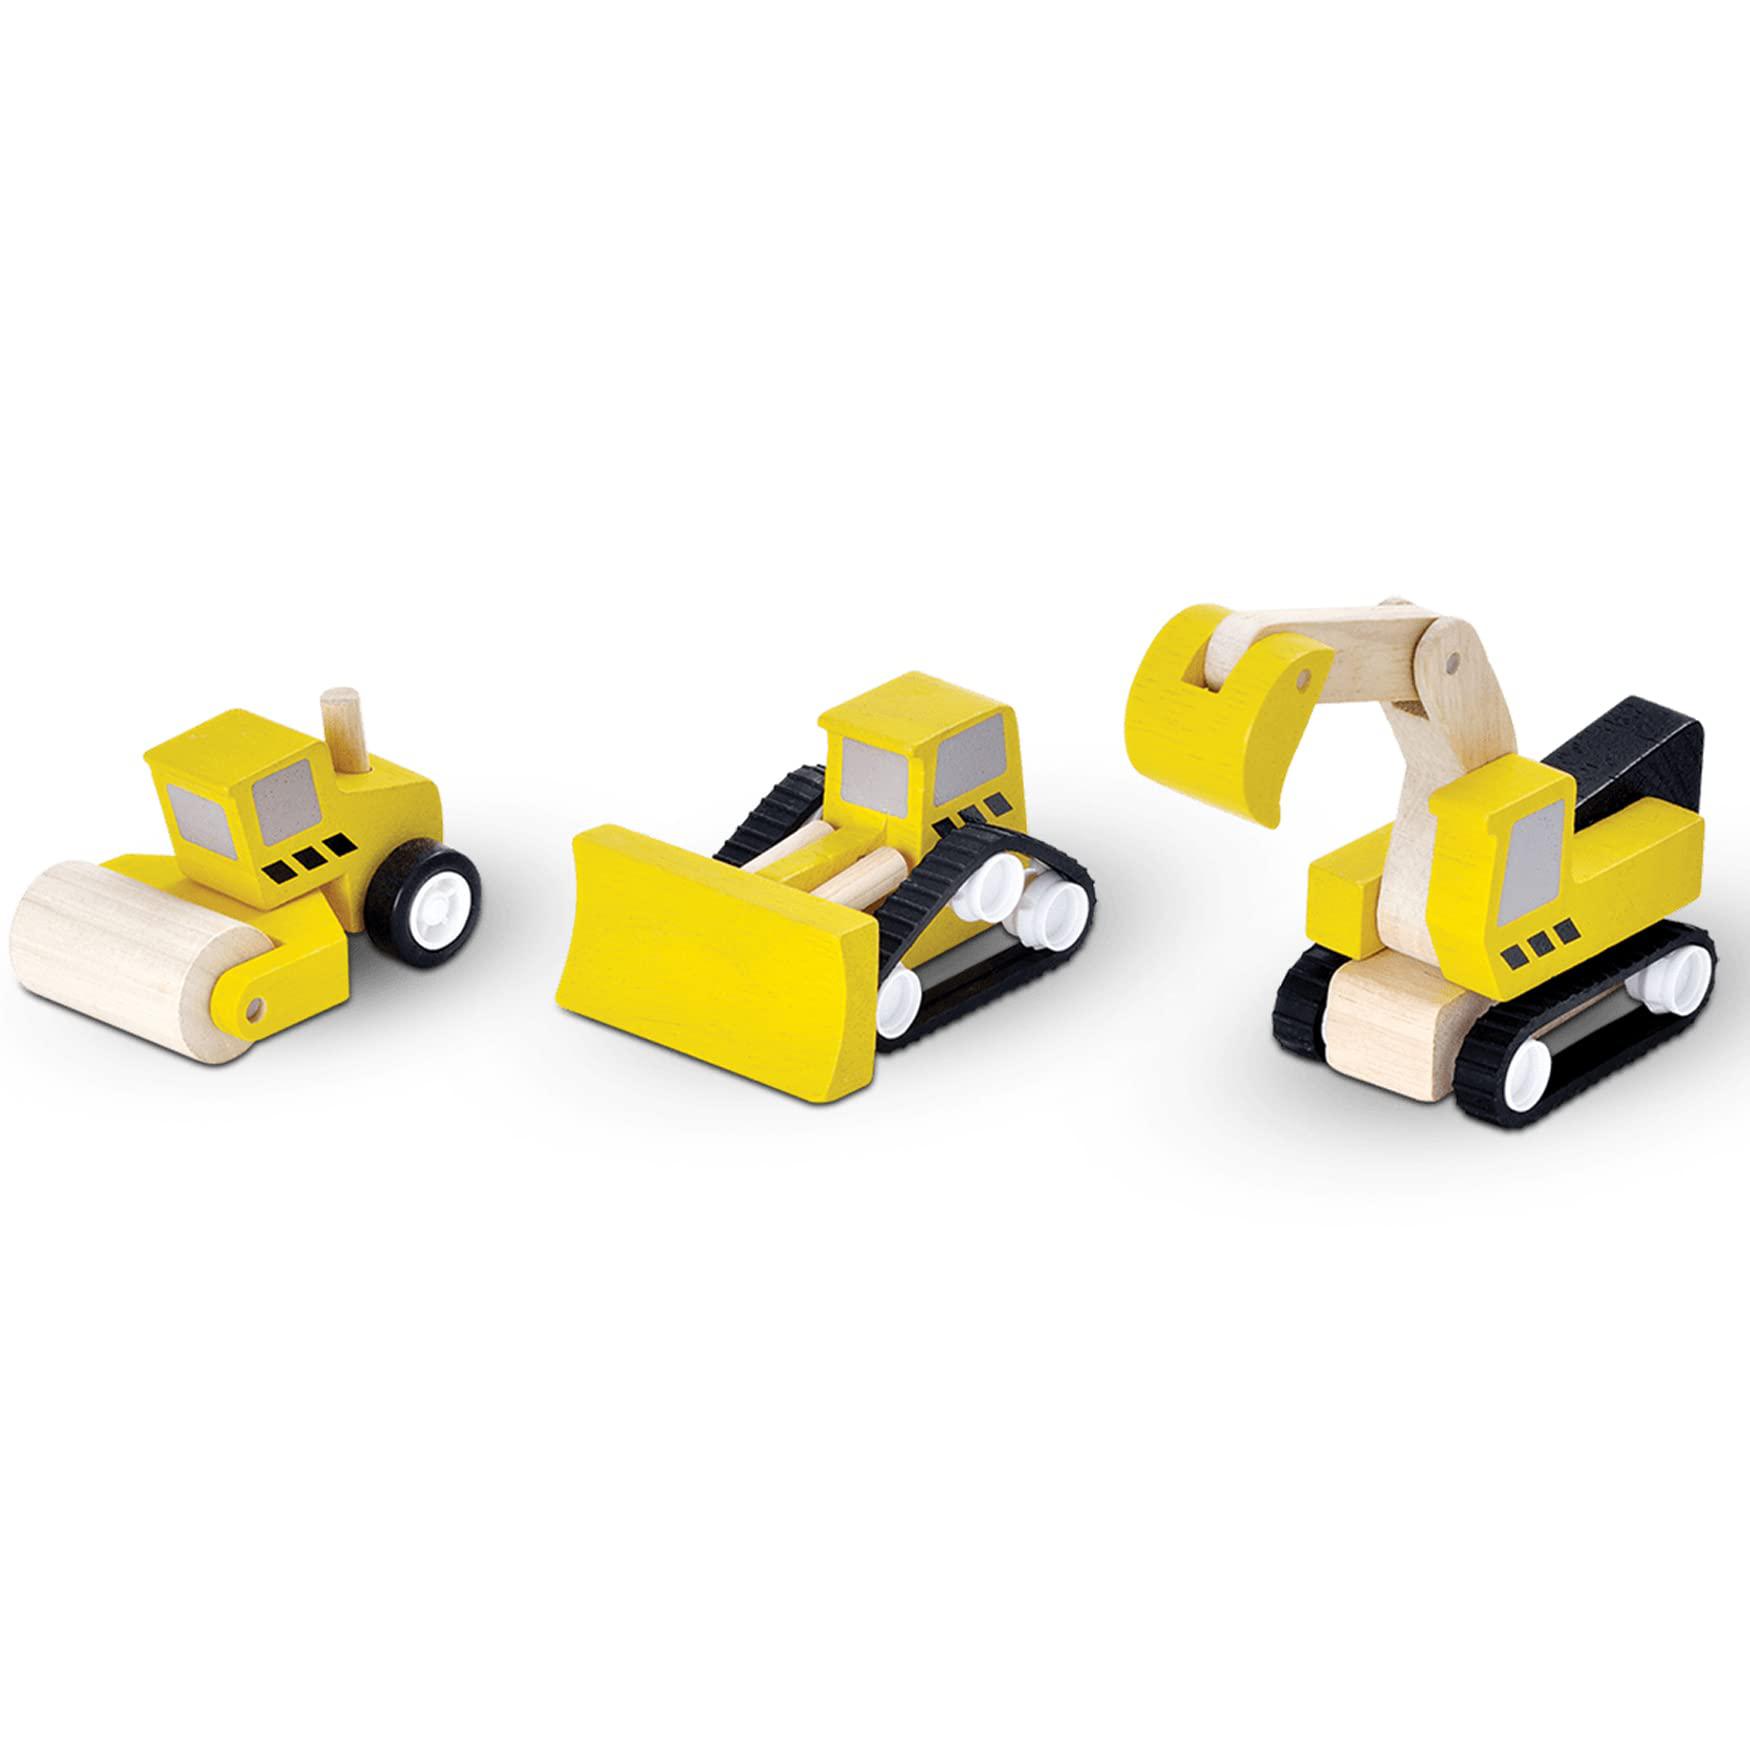 plantoys 3 piece wooden road construction set (6014)| sustainably made from rubberwood and non-toxic paints and dyes